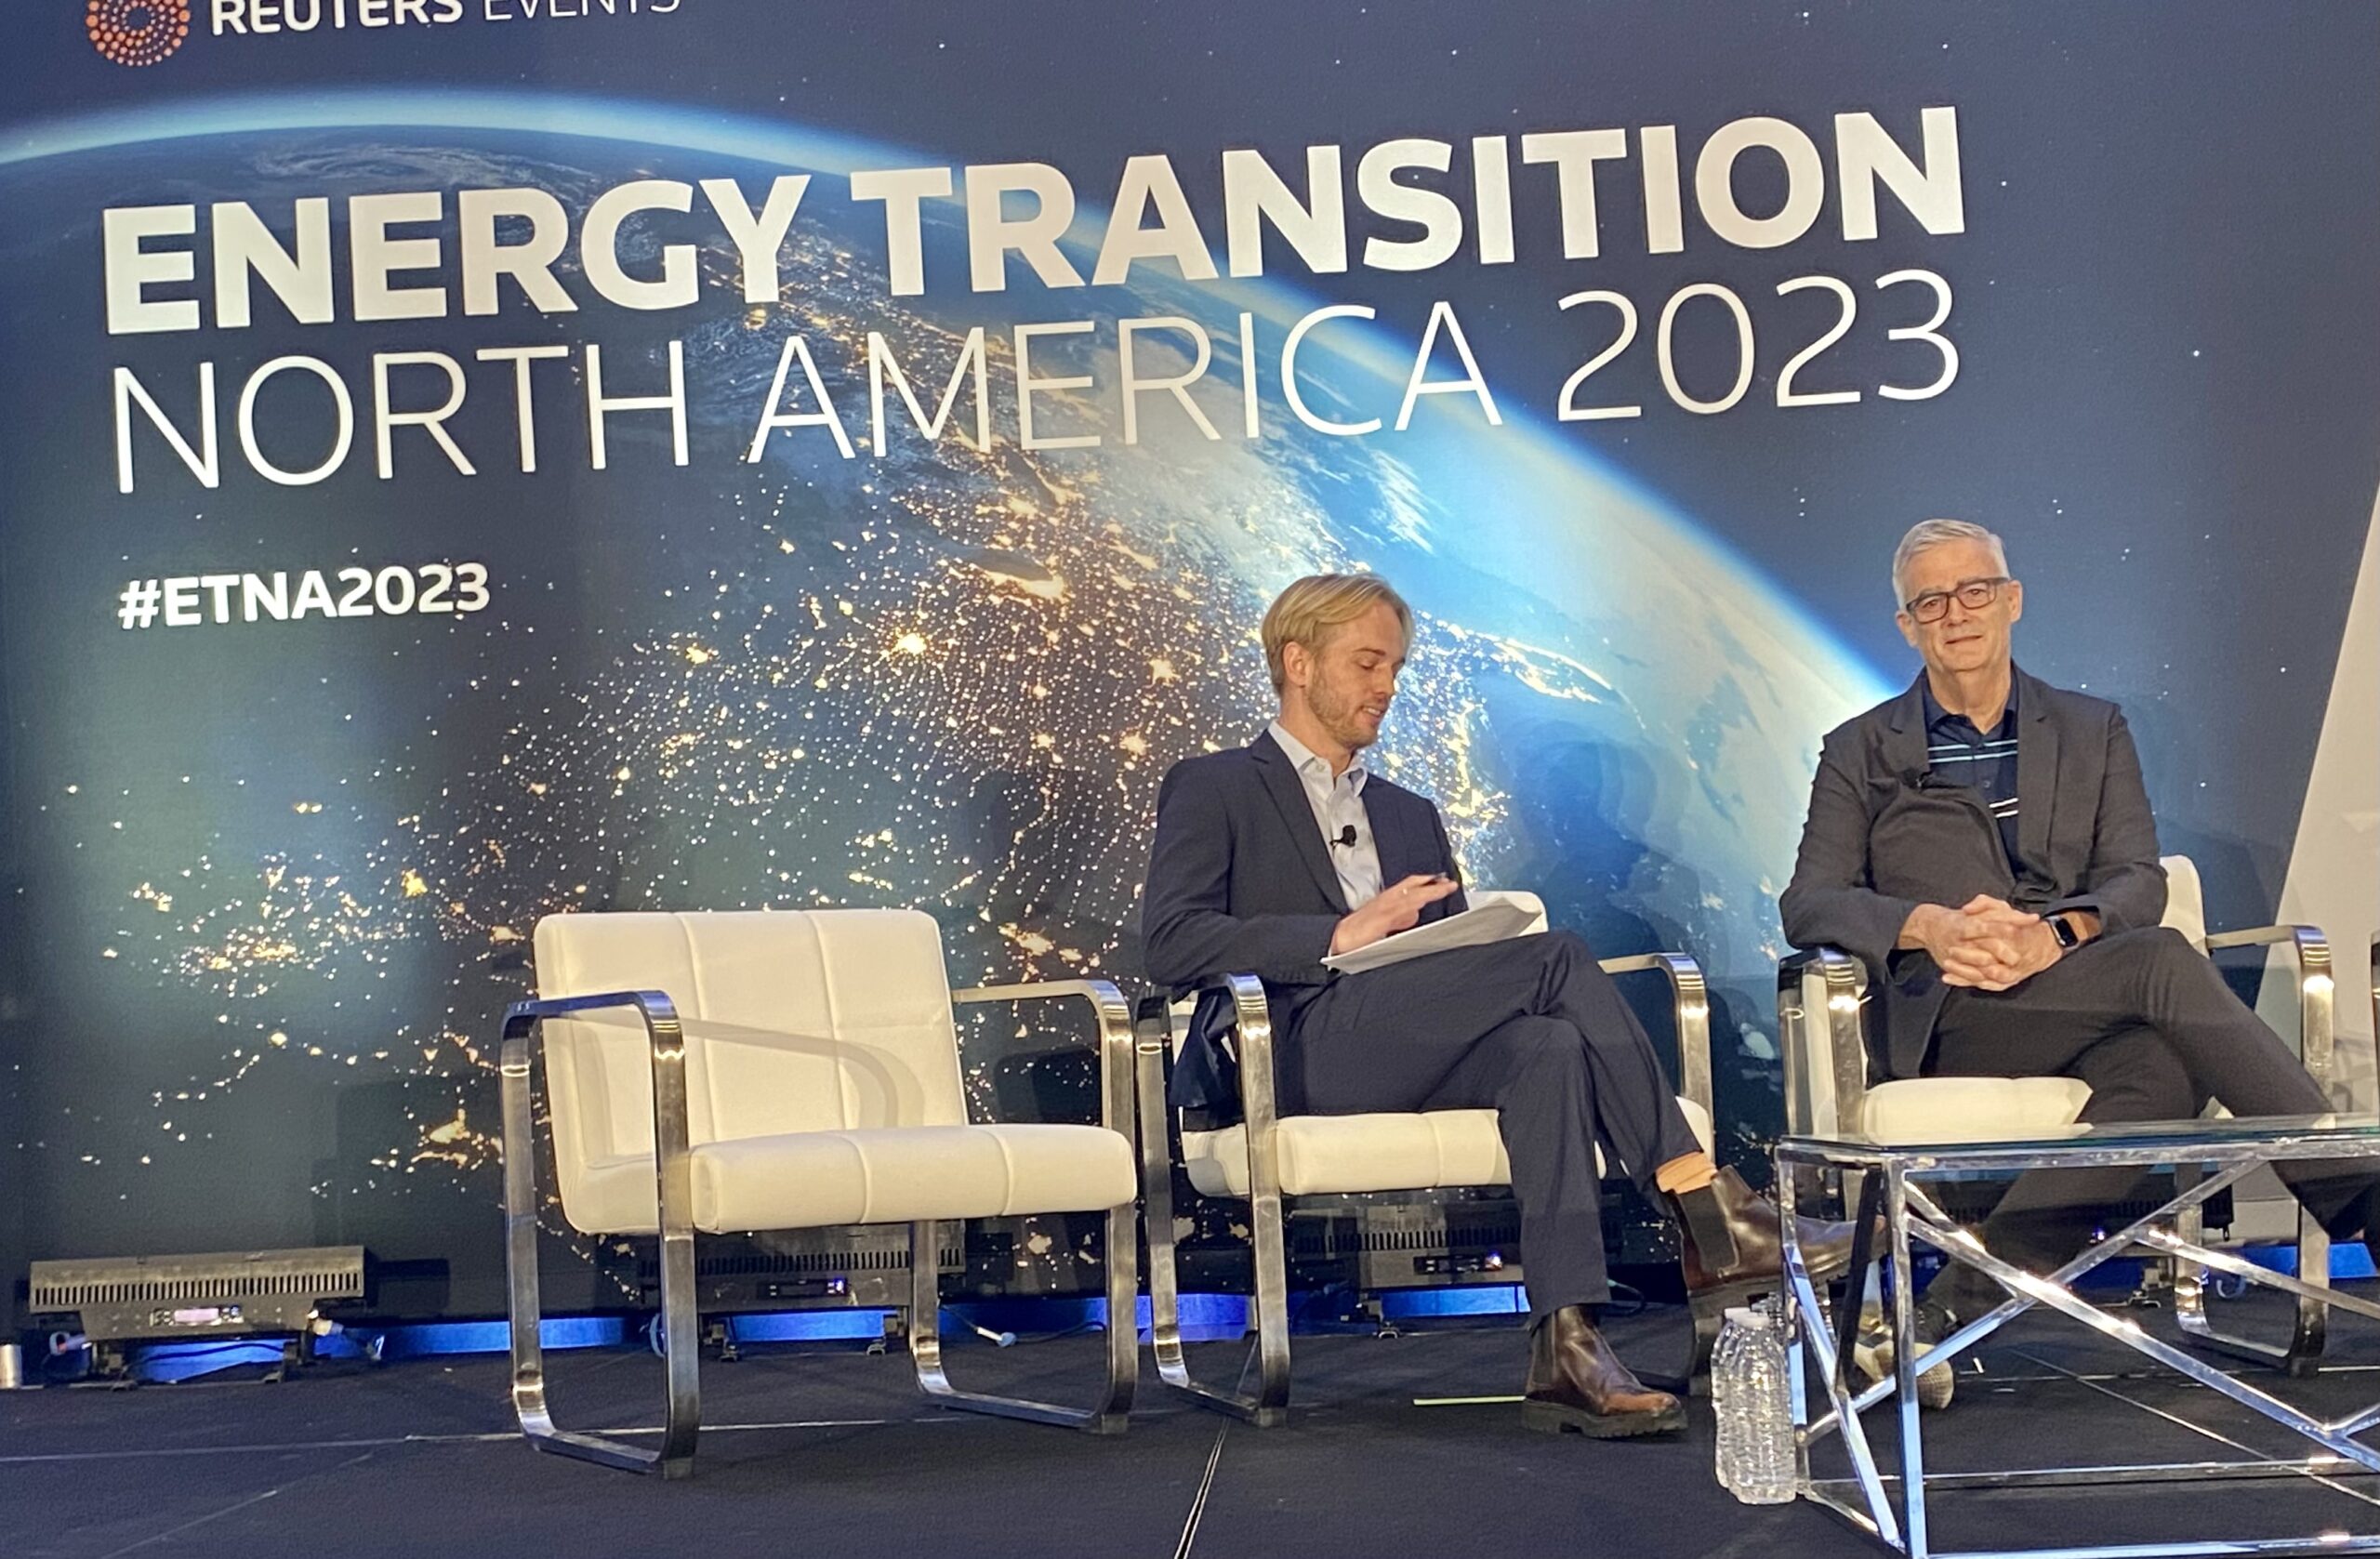 Chief Sustainability Officer Mike Train at the Reuters Energy Transition Conference 2023